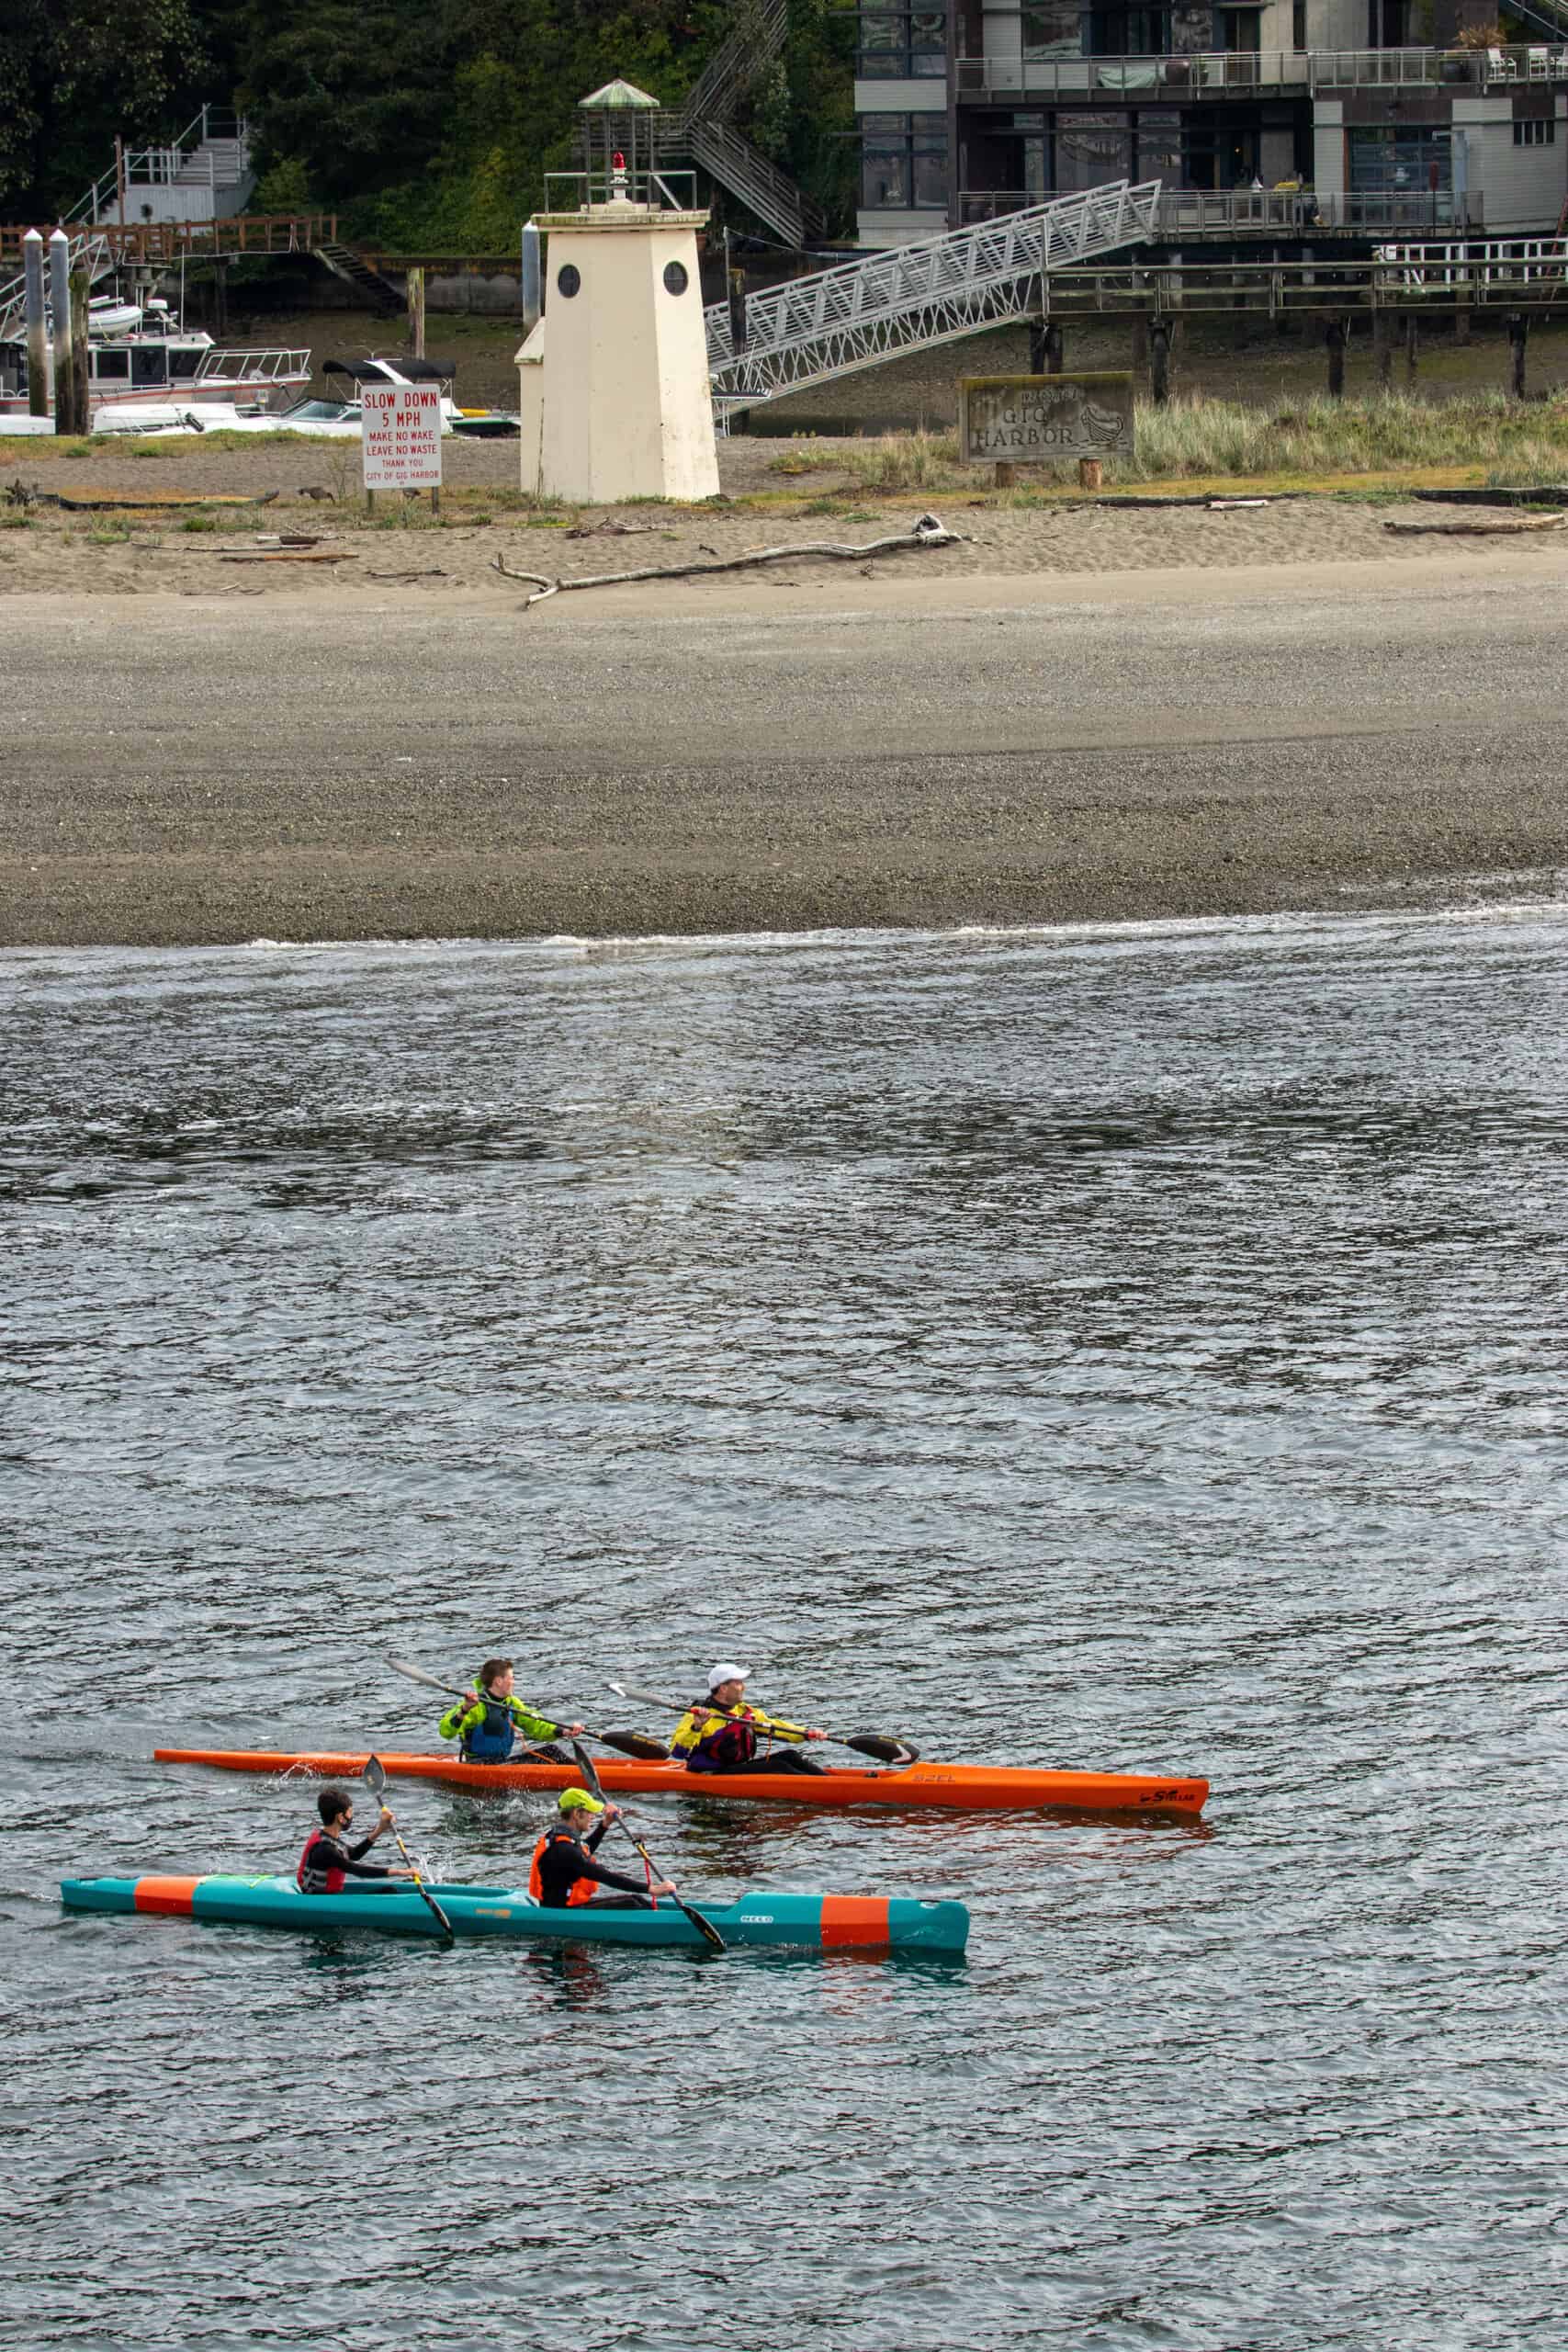 Aaron Laird, Mike Peterson and their sons paddling out of the harbor.